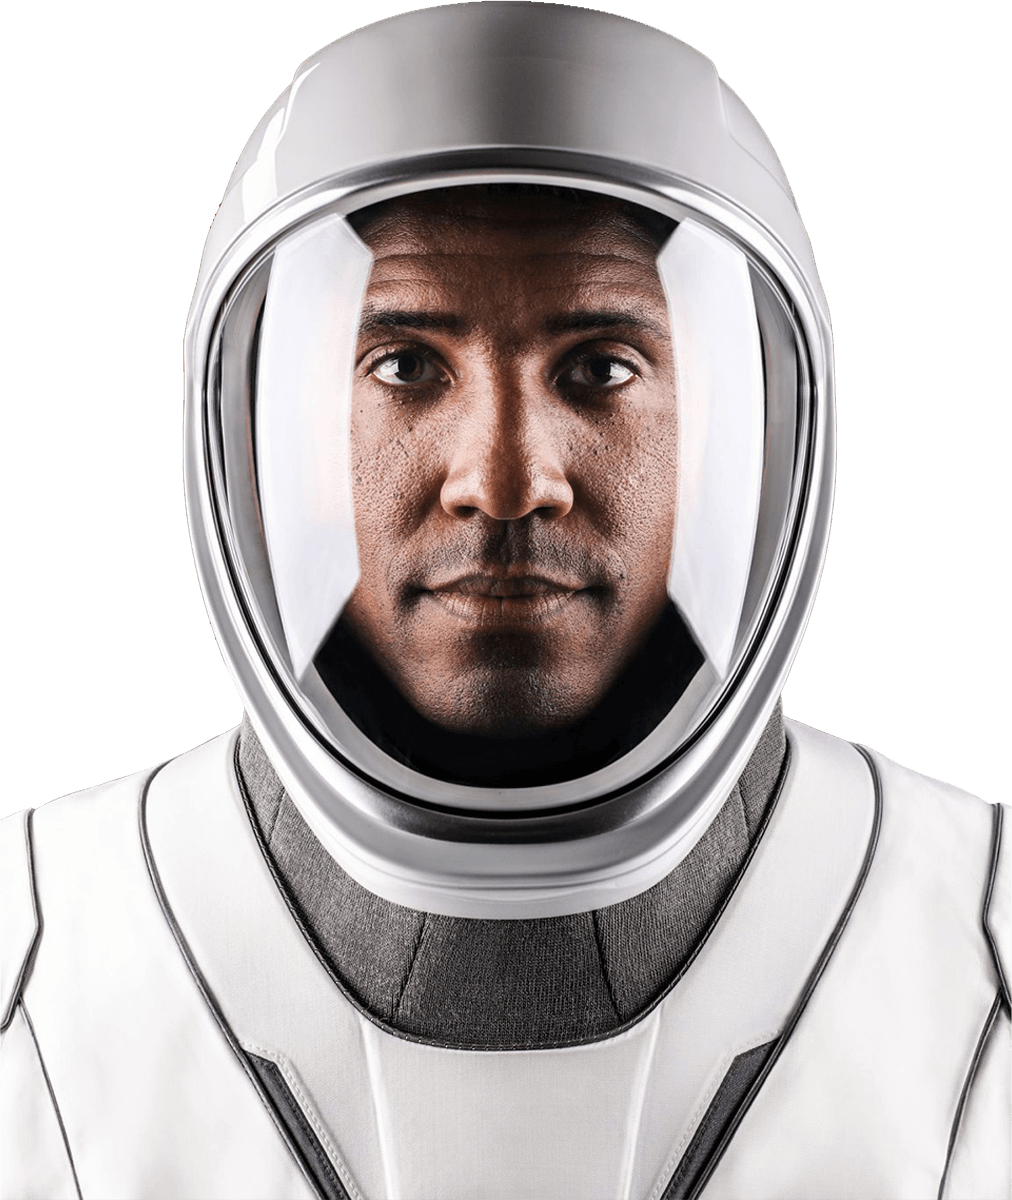 astronaut png, astronaut png cartoon, astronaut png clipart, astronaut png transparent, astronaut png hd, astronaut png 4k, astronaut png free, astronaut png vector, astronaut png icon, cute astronaut png, animated astronaut png, falling astronaut png, floating astronaut png, space astronaut png, minecraft astronaut png, astronaut helmet png, astronaut cartoon png, astronaut clipart png, astronaut suit png, astronauts png, astronaut vector png, astronaut silhouette png, astronaut illustration png, astronaut icon png, astronaut logo png, astronaut png cartoon, astronaut png clipart, astronaut png vector, cute astronaut png, astronaut png transparent, space png,